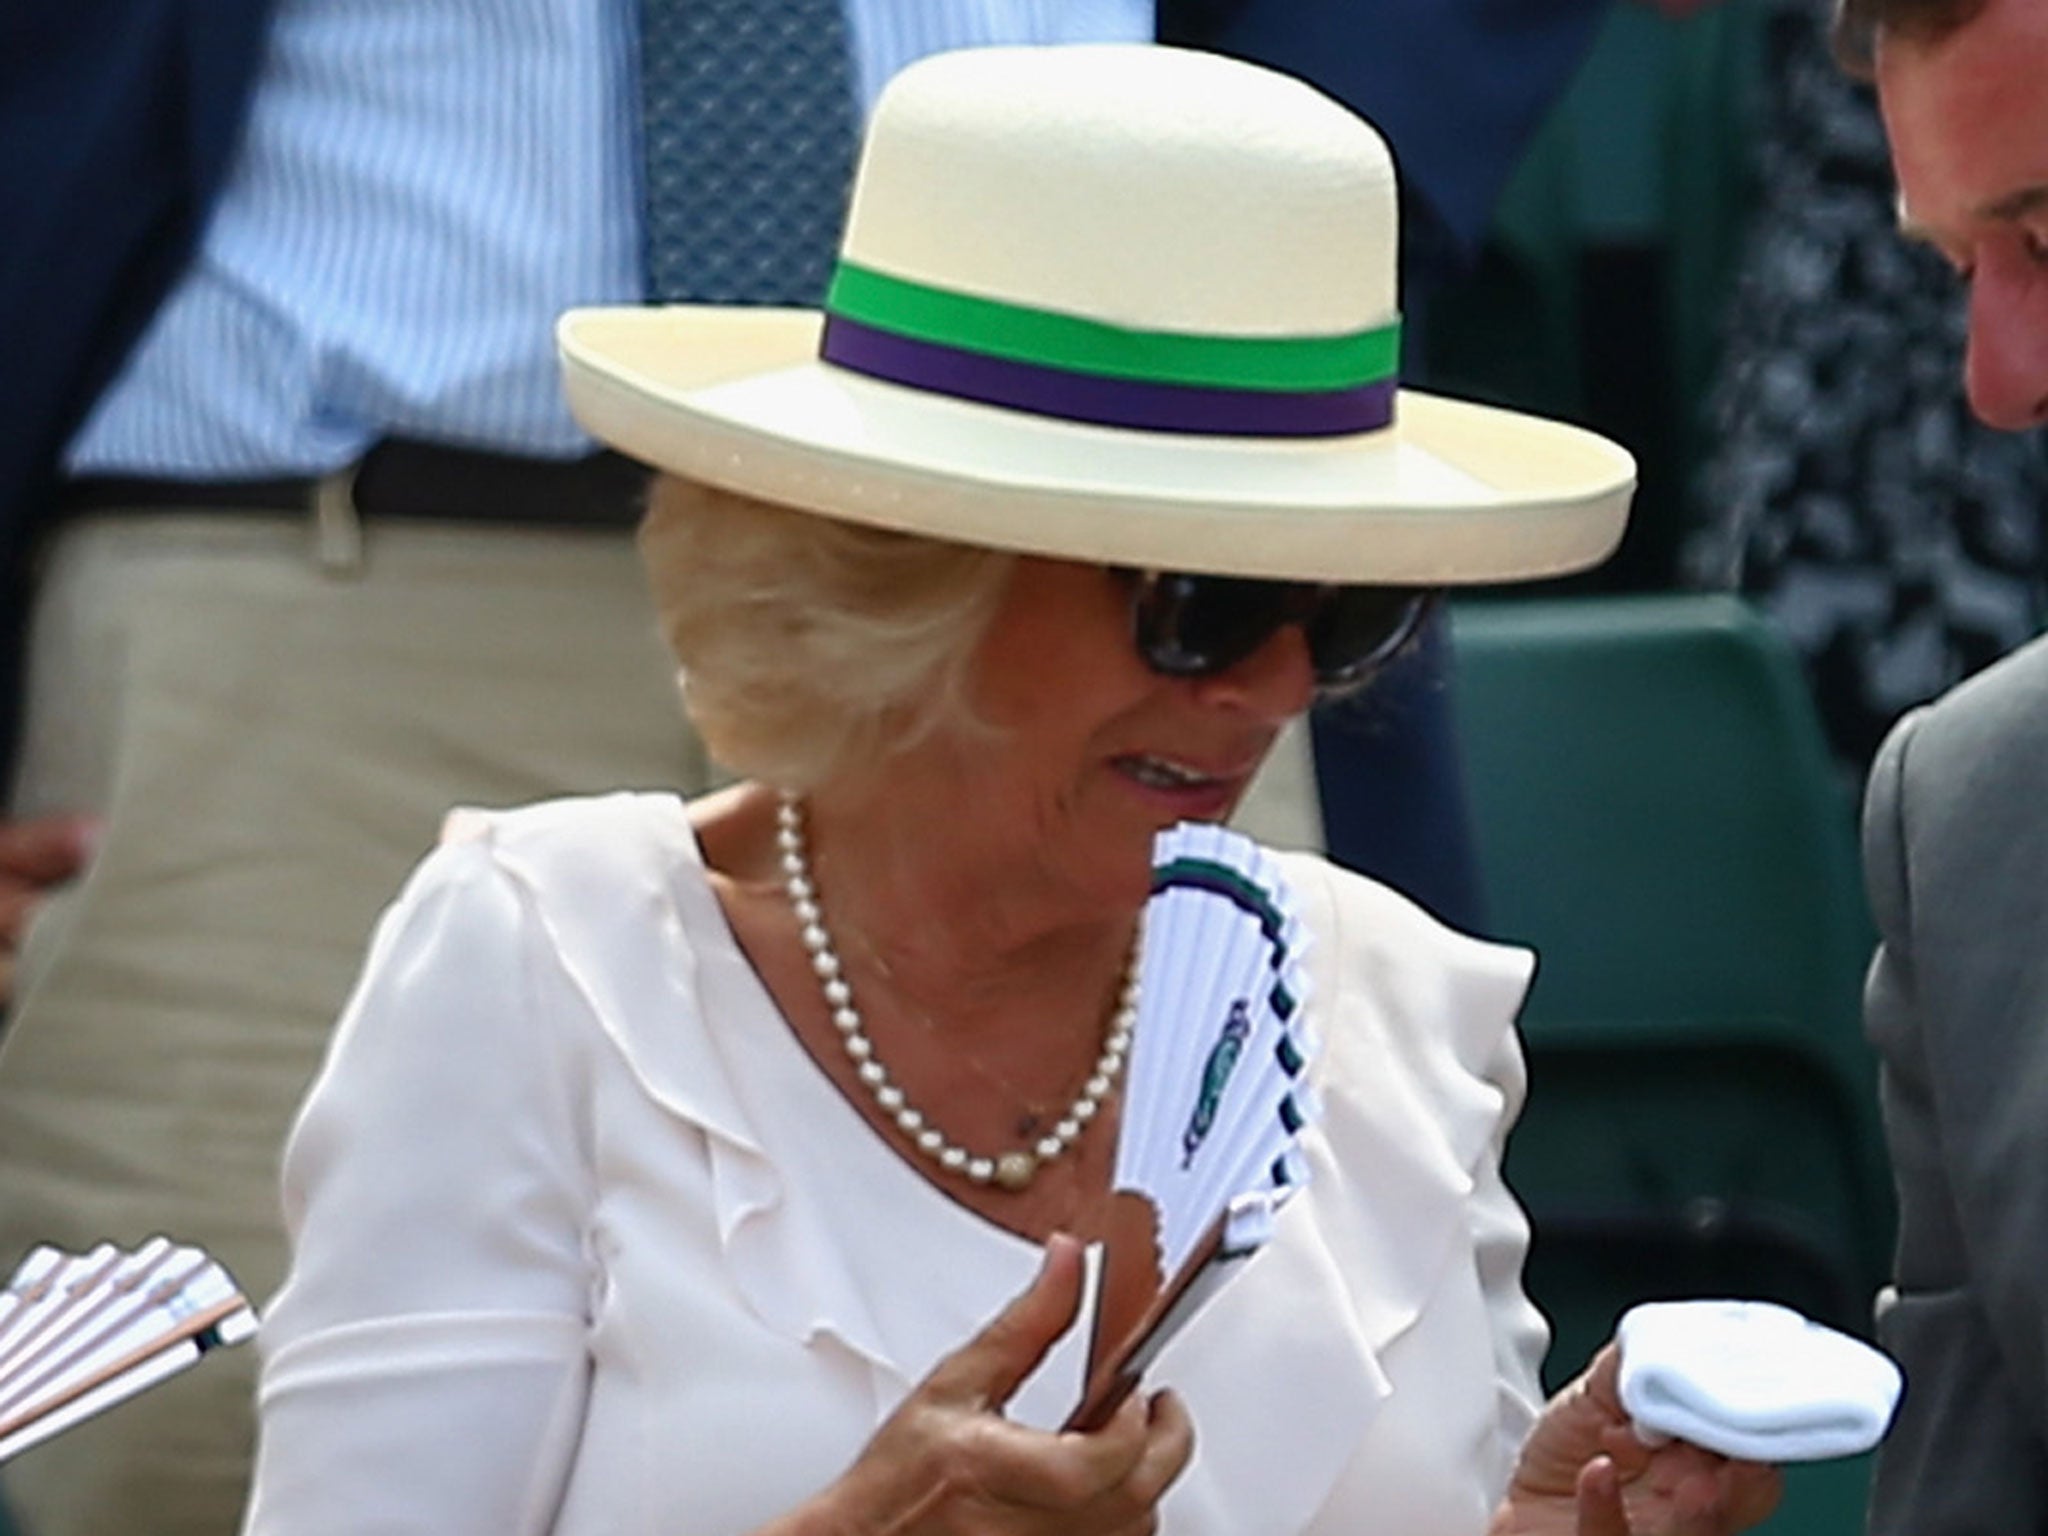 The Duchess of Cornwall with Andy Murray's wristband